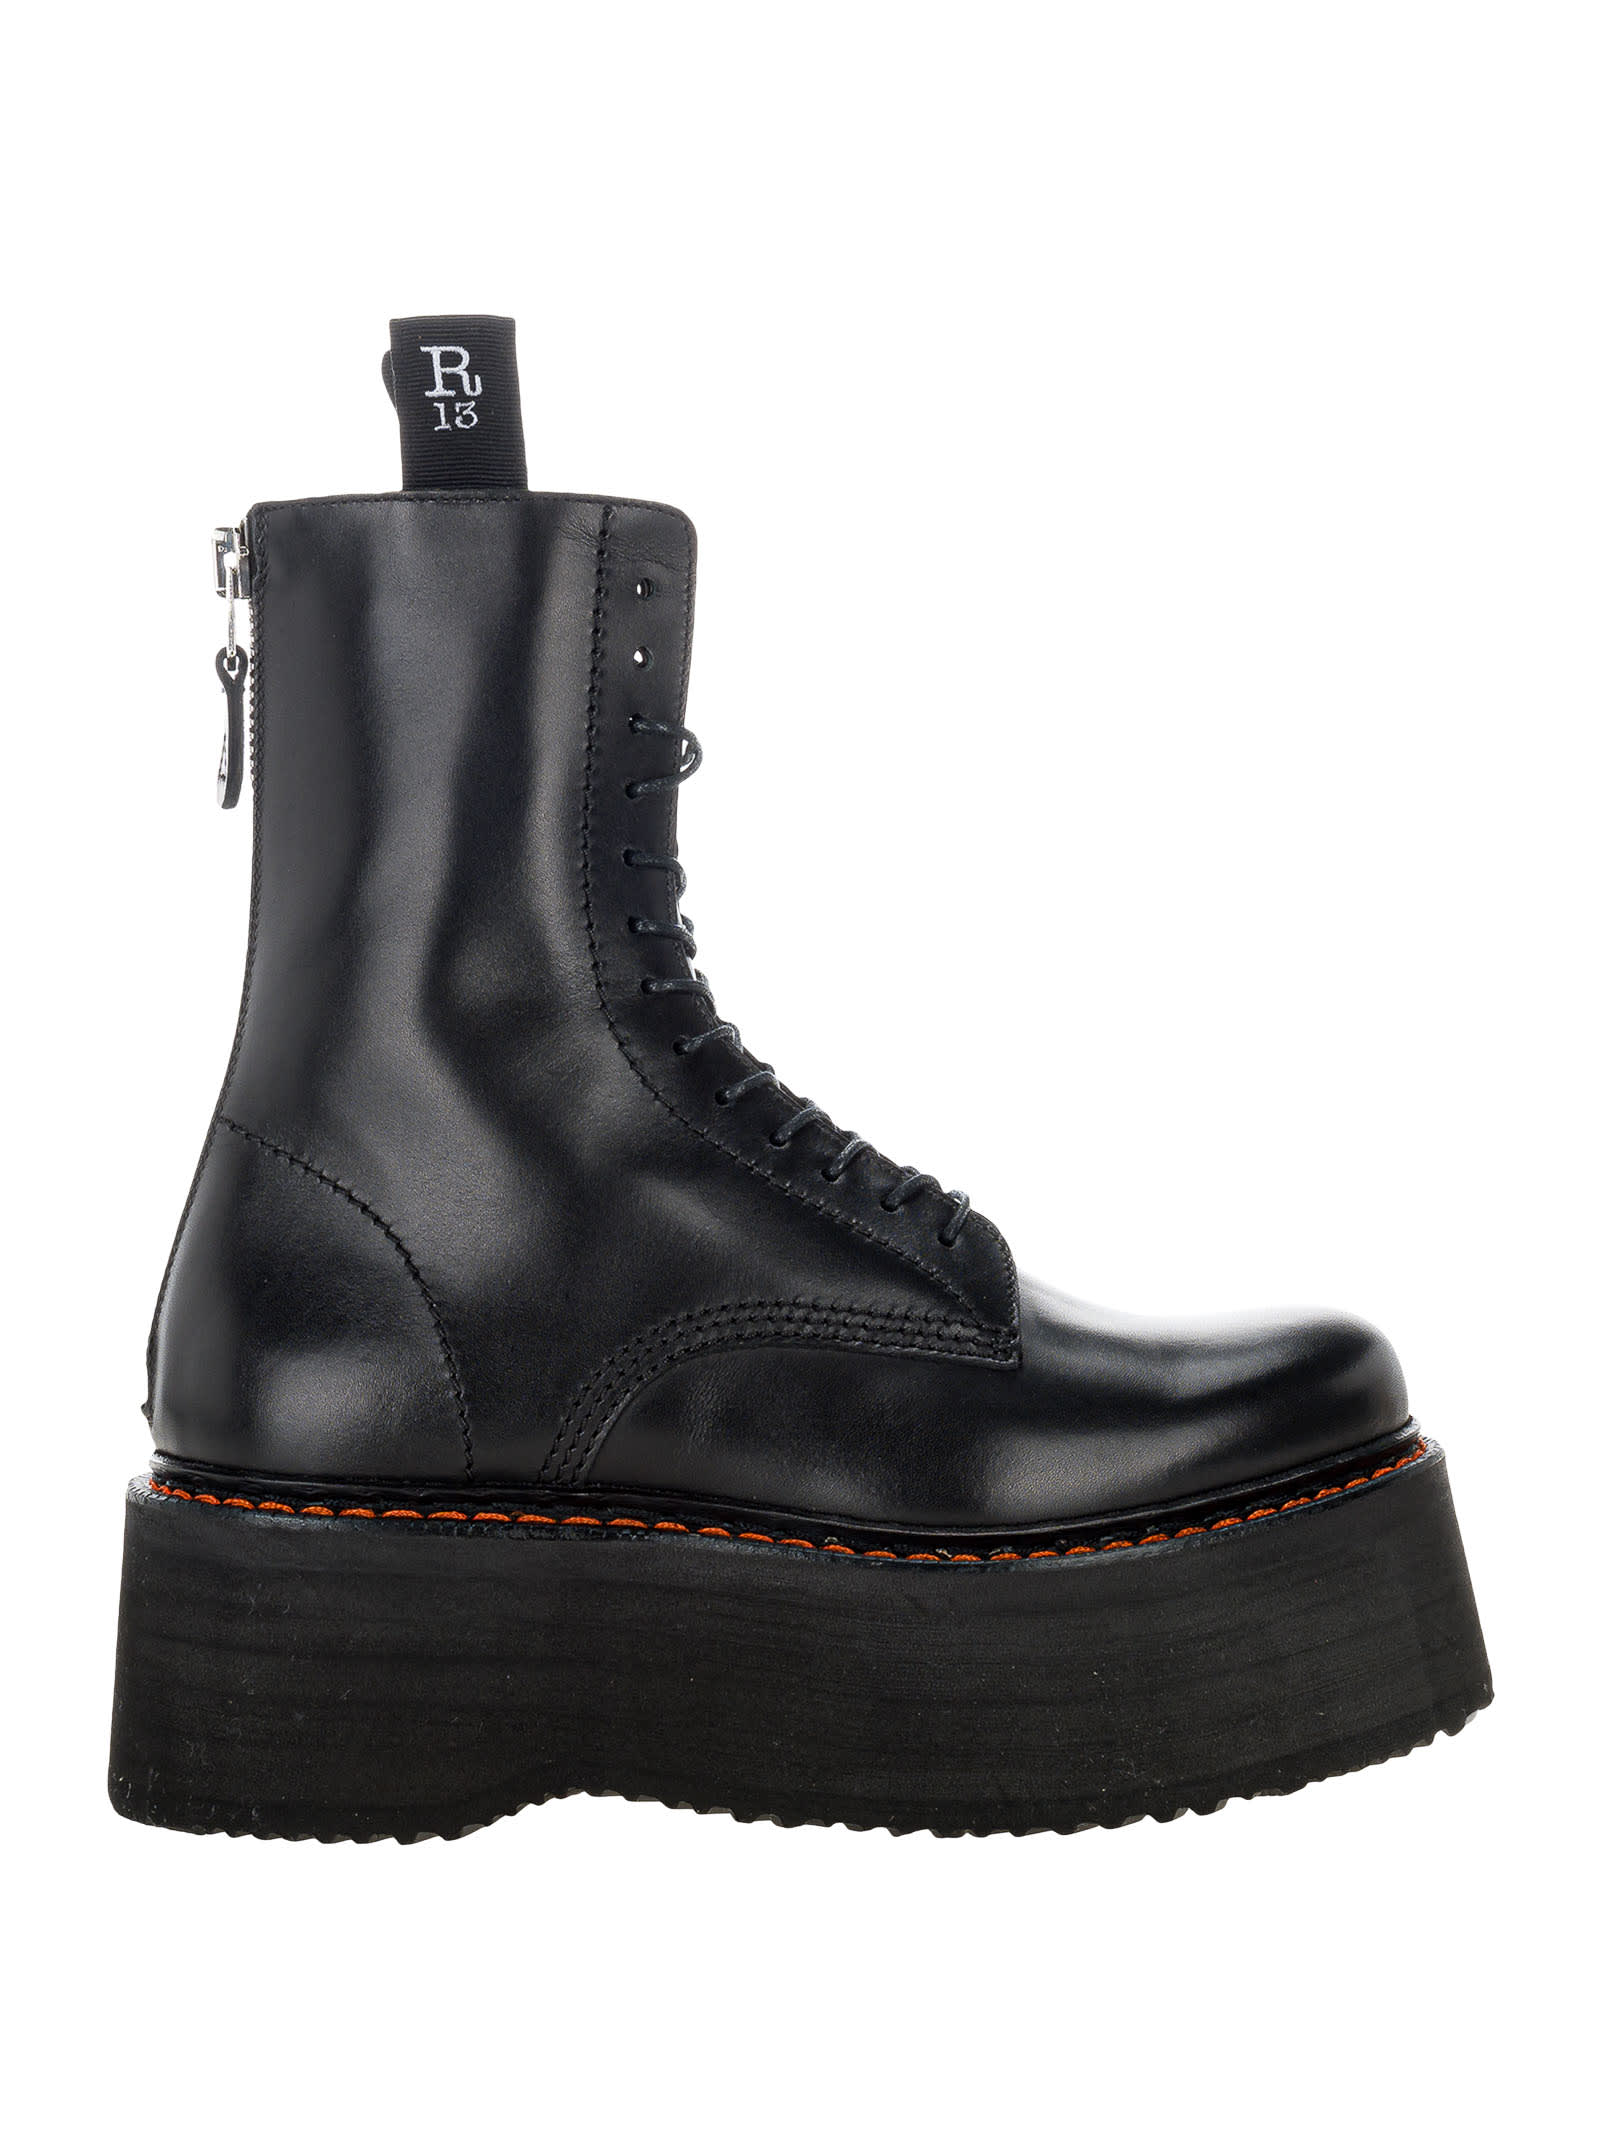 R13 Black Double Stack Lace-up Leather Boots